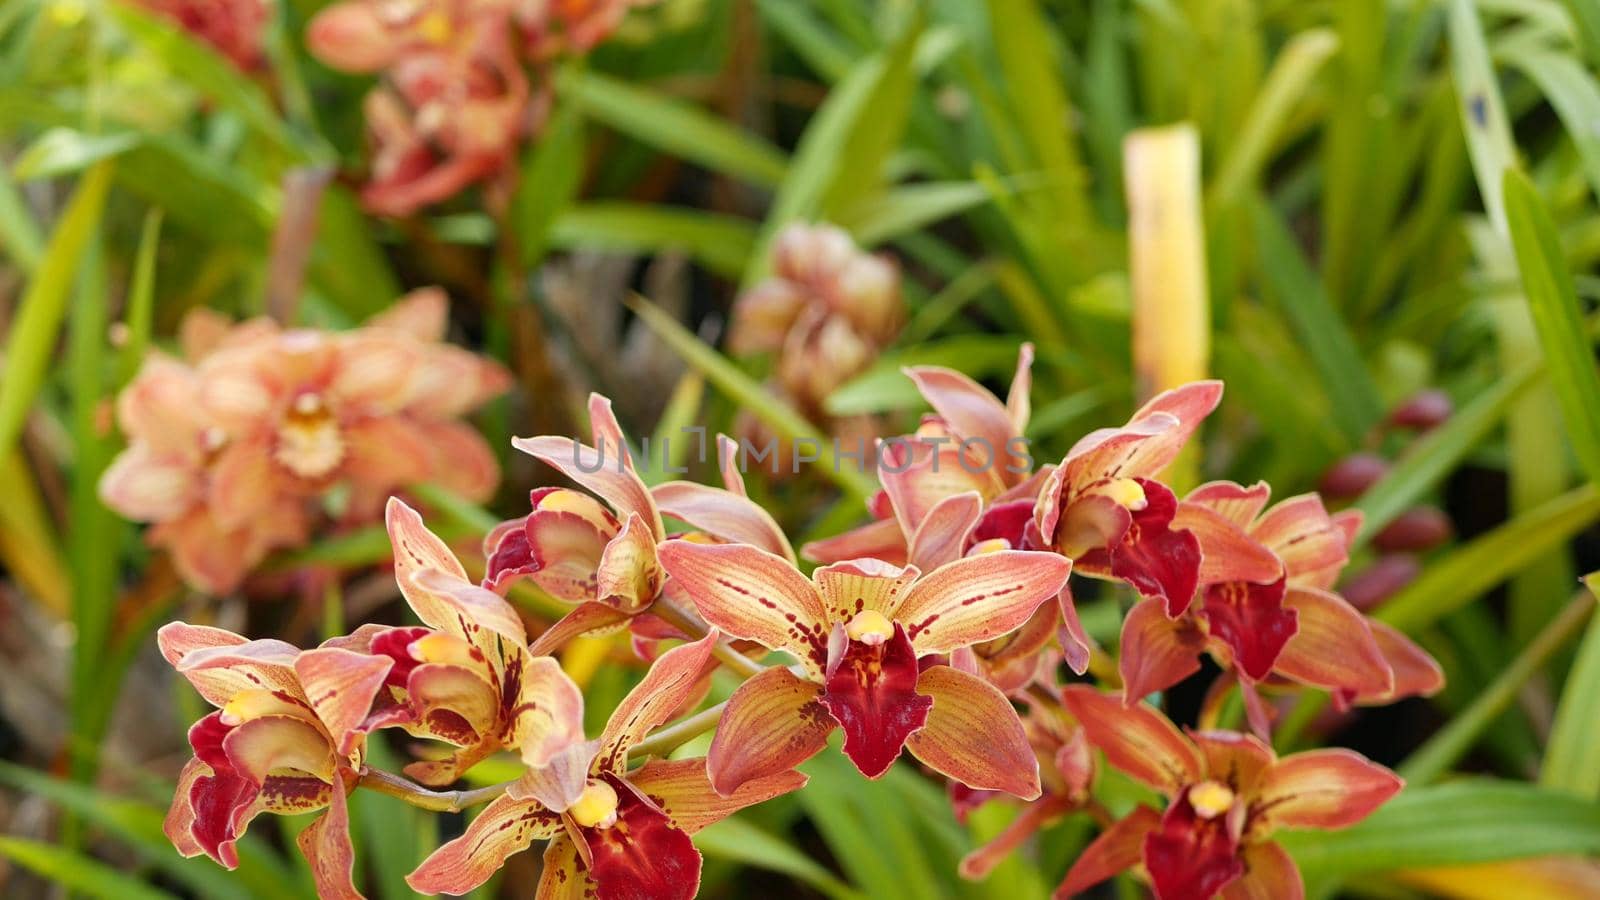 Orchid flower blossom in green leaves. Elegant colorful floral bloom. Exotic tropical jungle rainforest botanical atmosphere. Natural garden vivid greenery, paradise aesthetic. Decorative floriculture